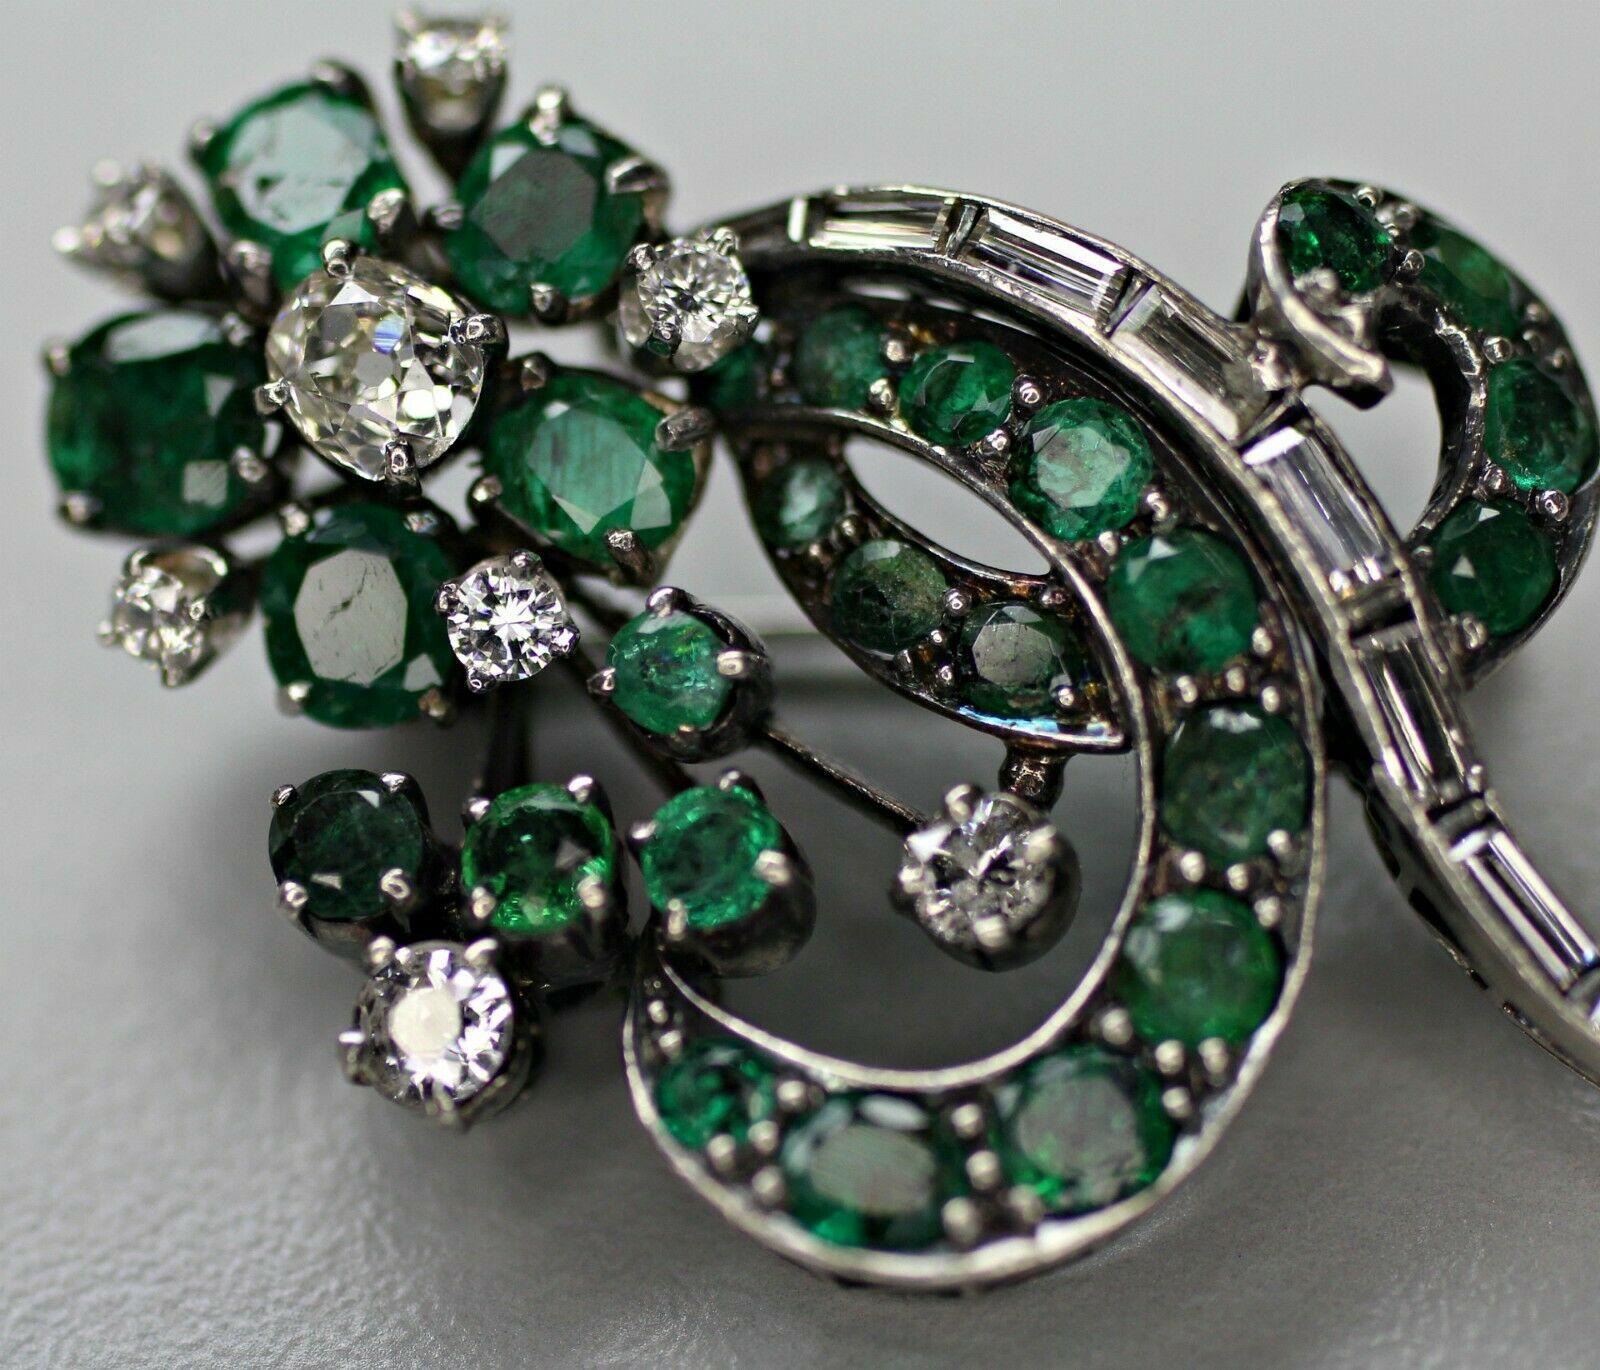 This is a 14k white gold vintage art deco style emerald and diamond brooch. The natural emeralds, approximately 2 carat total weight, are even dark green in color. There are approximately 1 carat total weight of white brilliant diamonds adjacent to